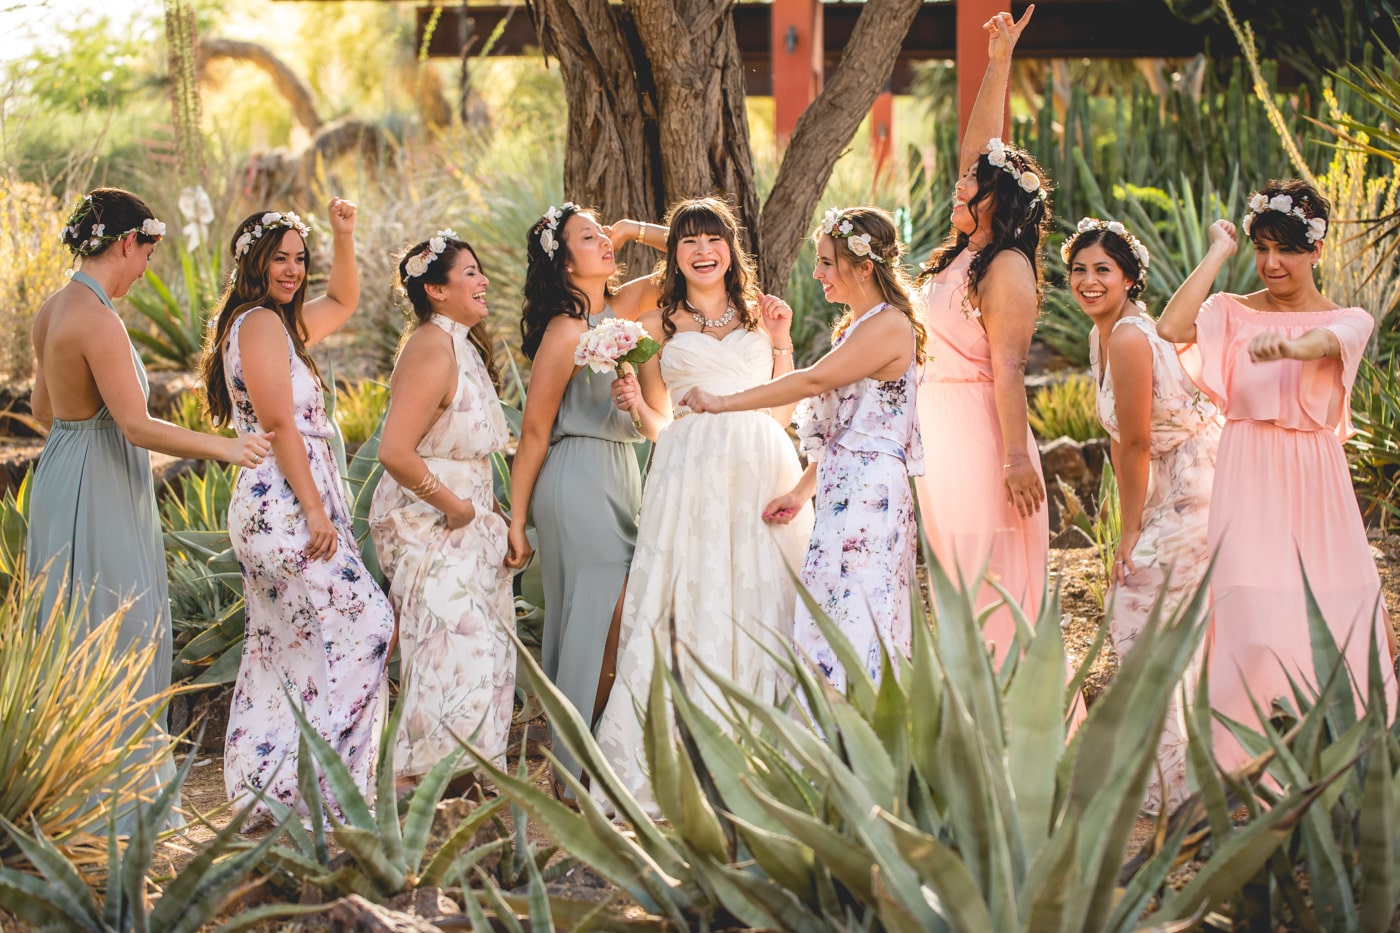 Bride and bridesmaids in fun pose outside